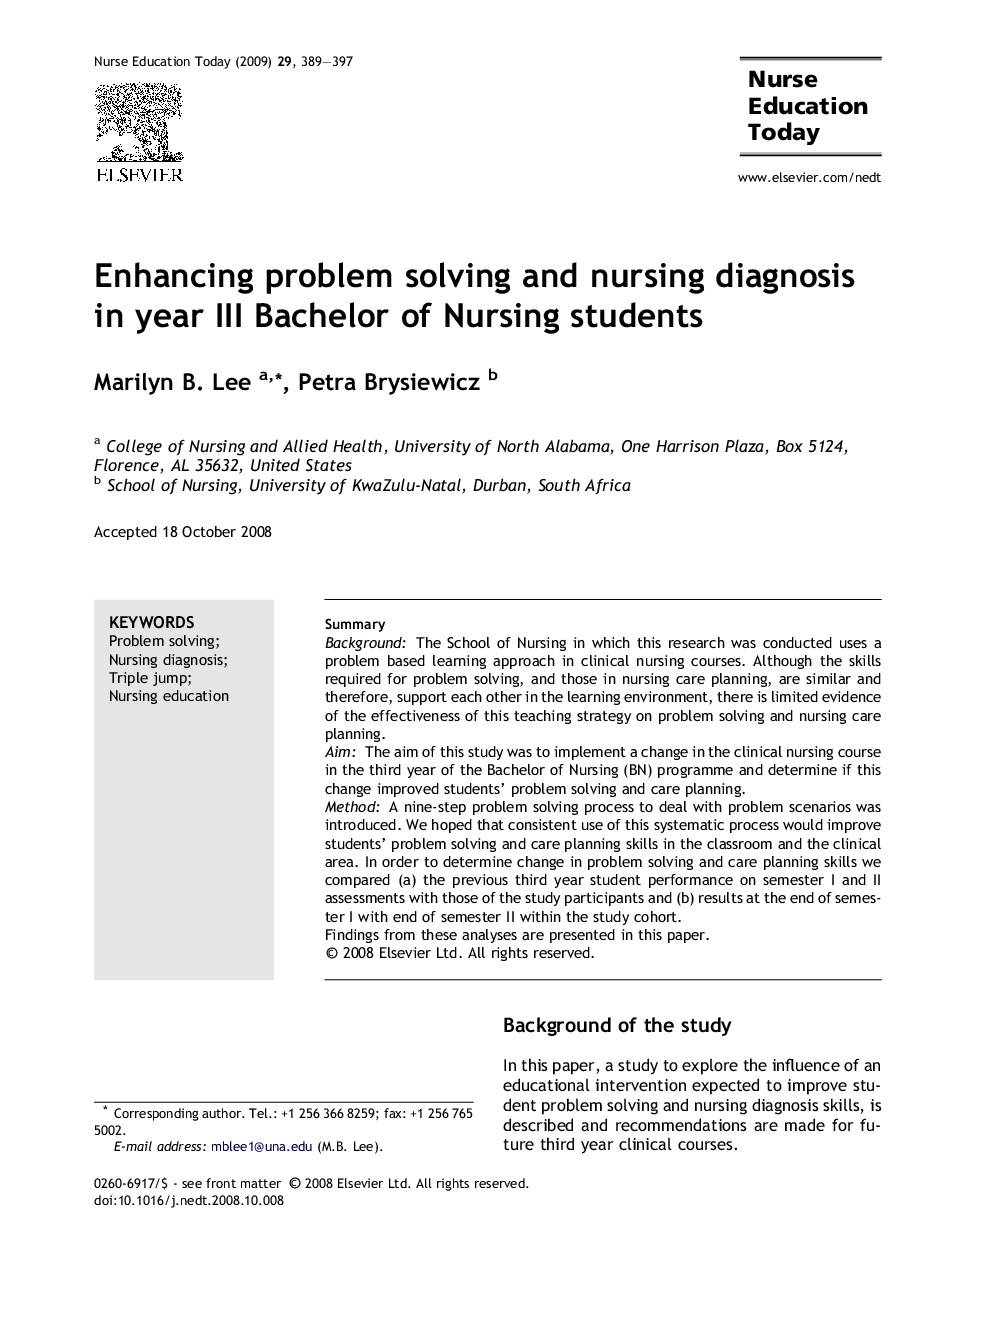 Enhancing problem solving and nursing diagnosis in year III Bachelor of Nursing students